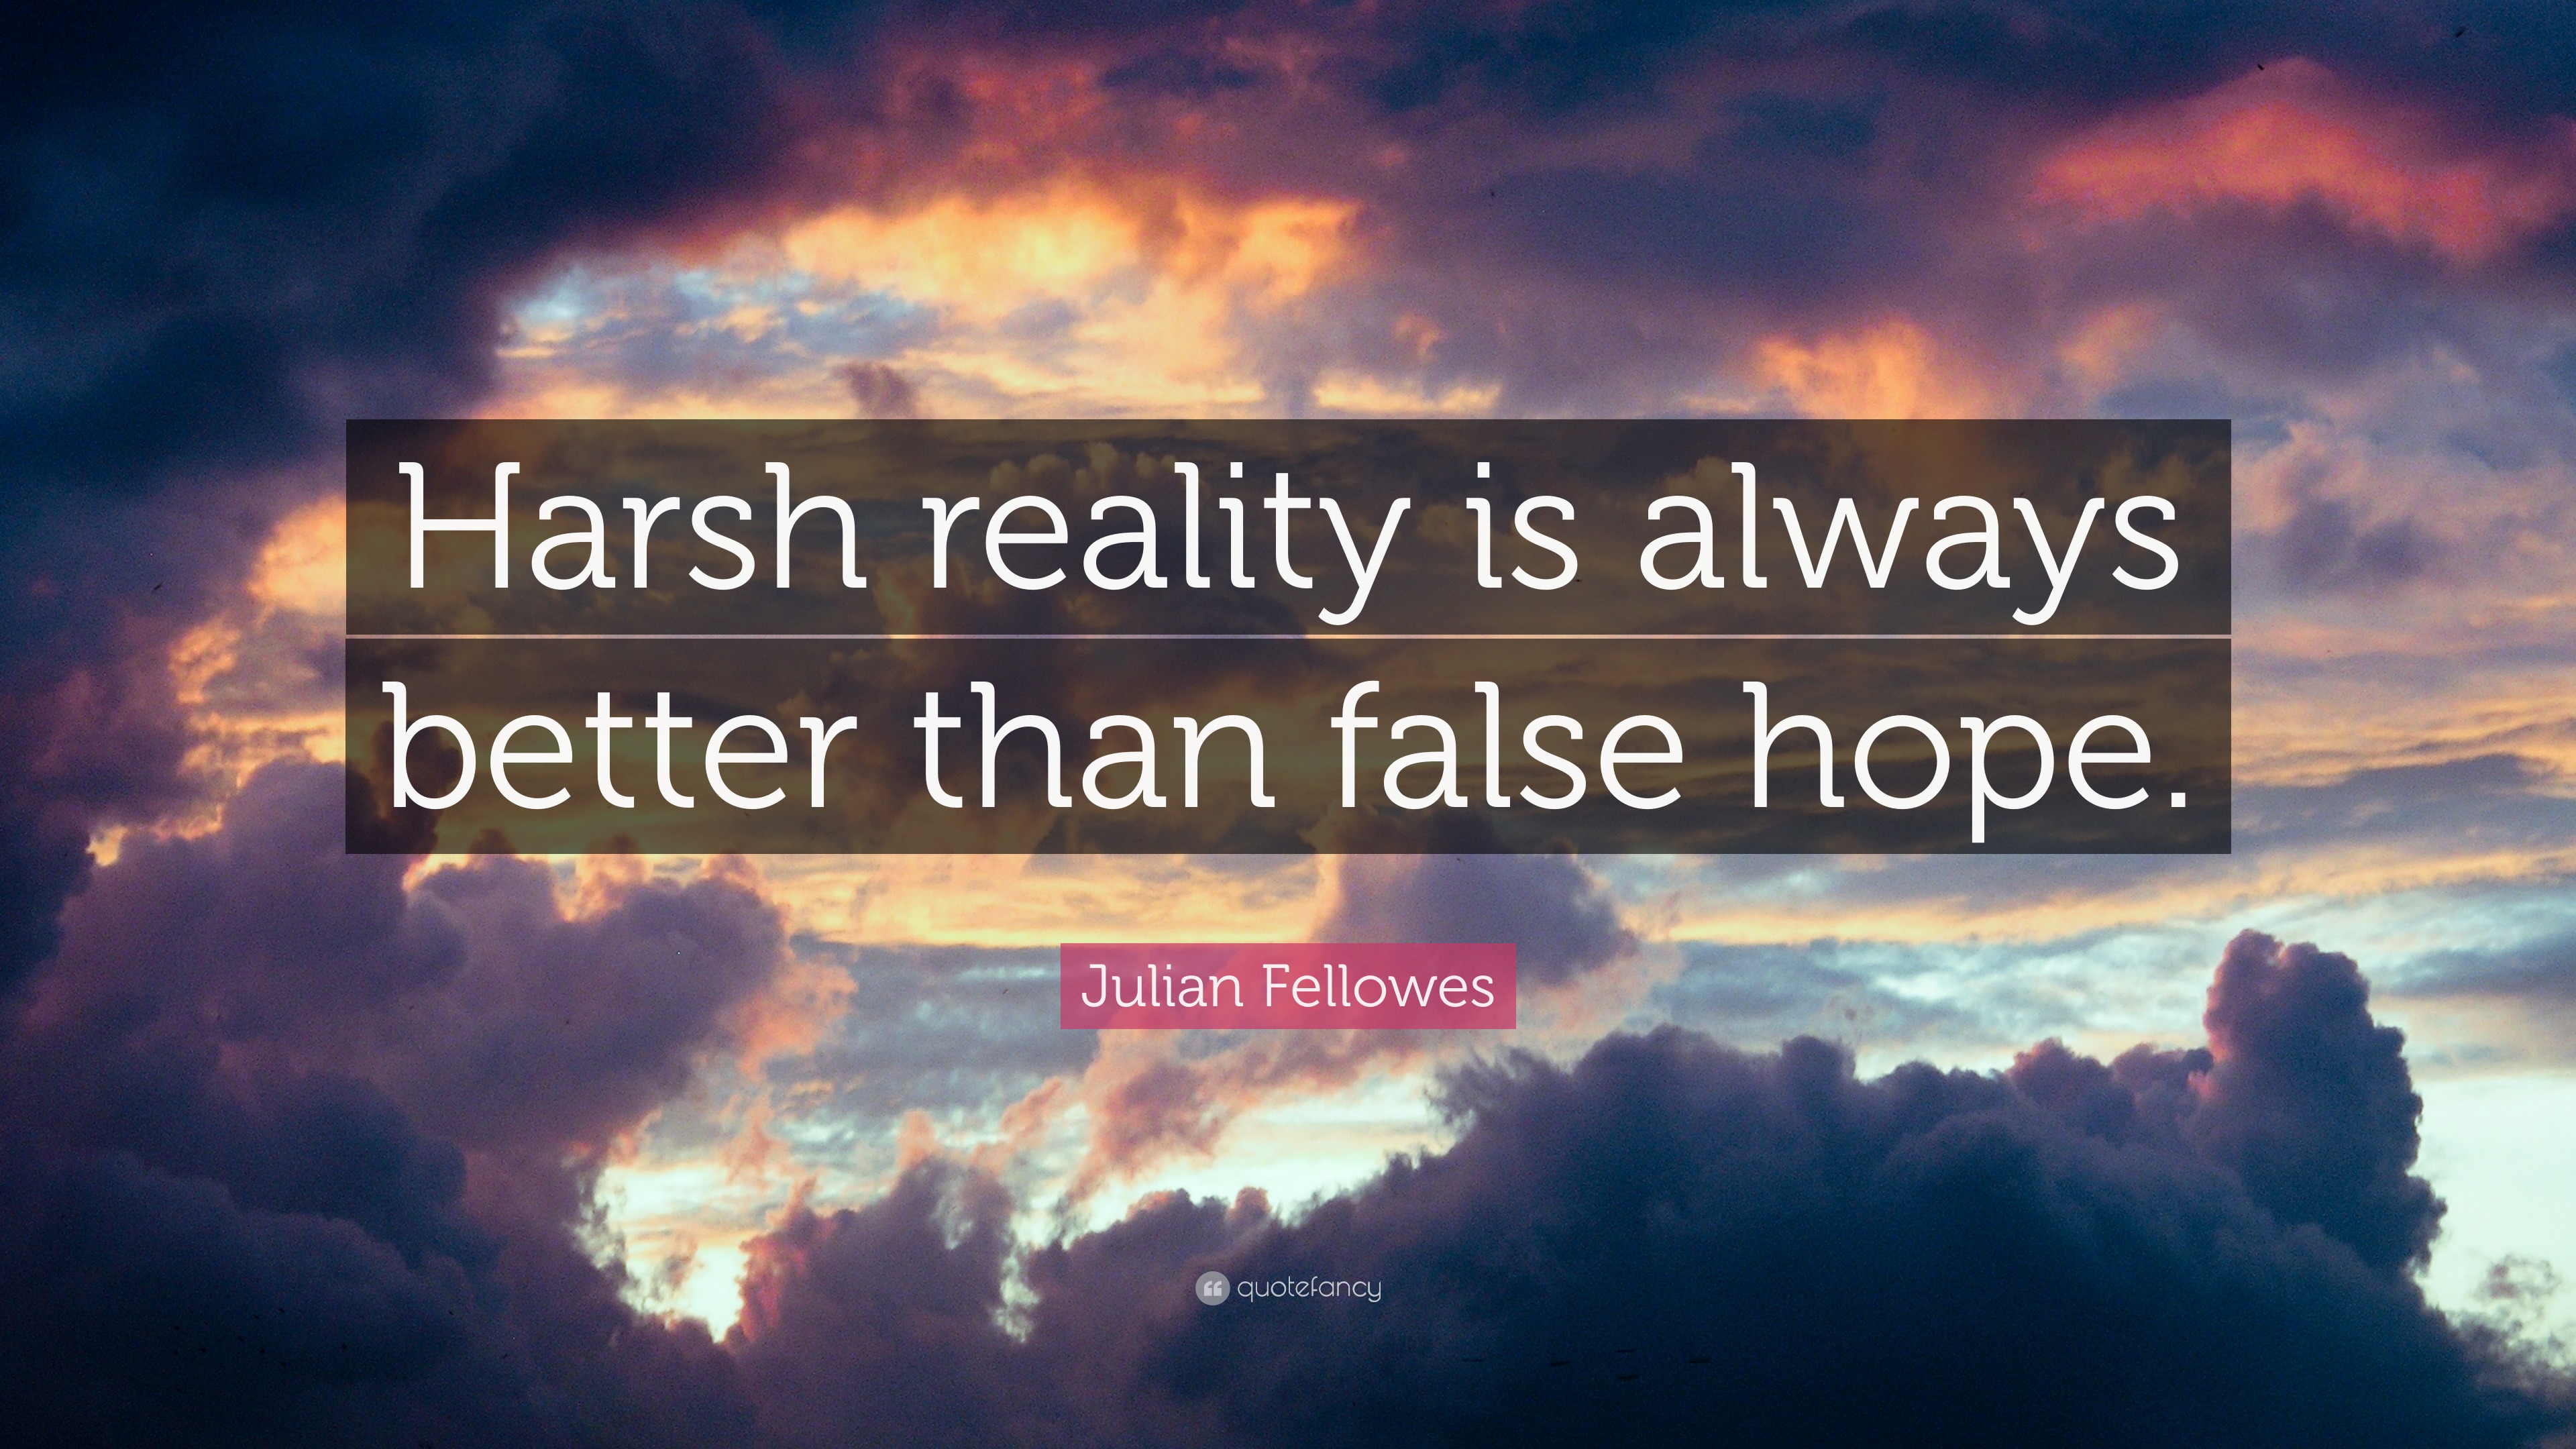 Julian Fellowes Quote: “Harsh reality is always better than false hope.”